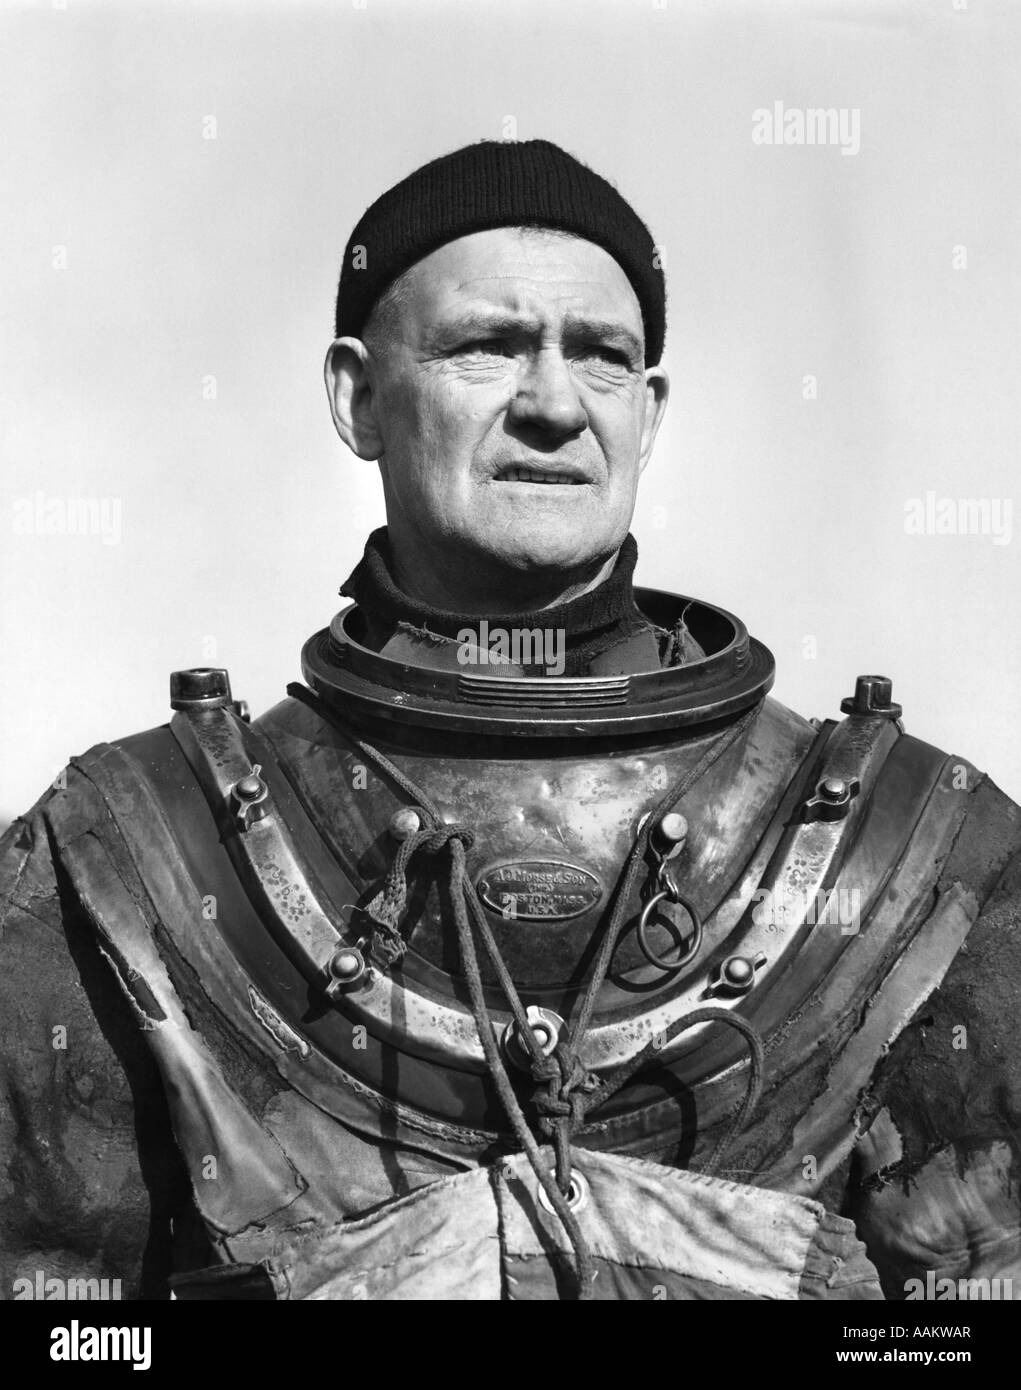 1940s DEEP WATER MARINE DIVER WEARING PRESSURE SUIT WITHOUT THE HELMET MAN PORTRAIT RUGGED ADVENTURE Stock Photo